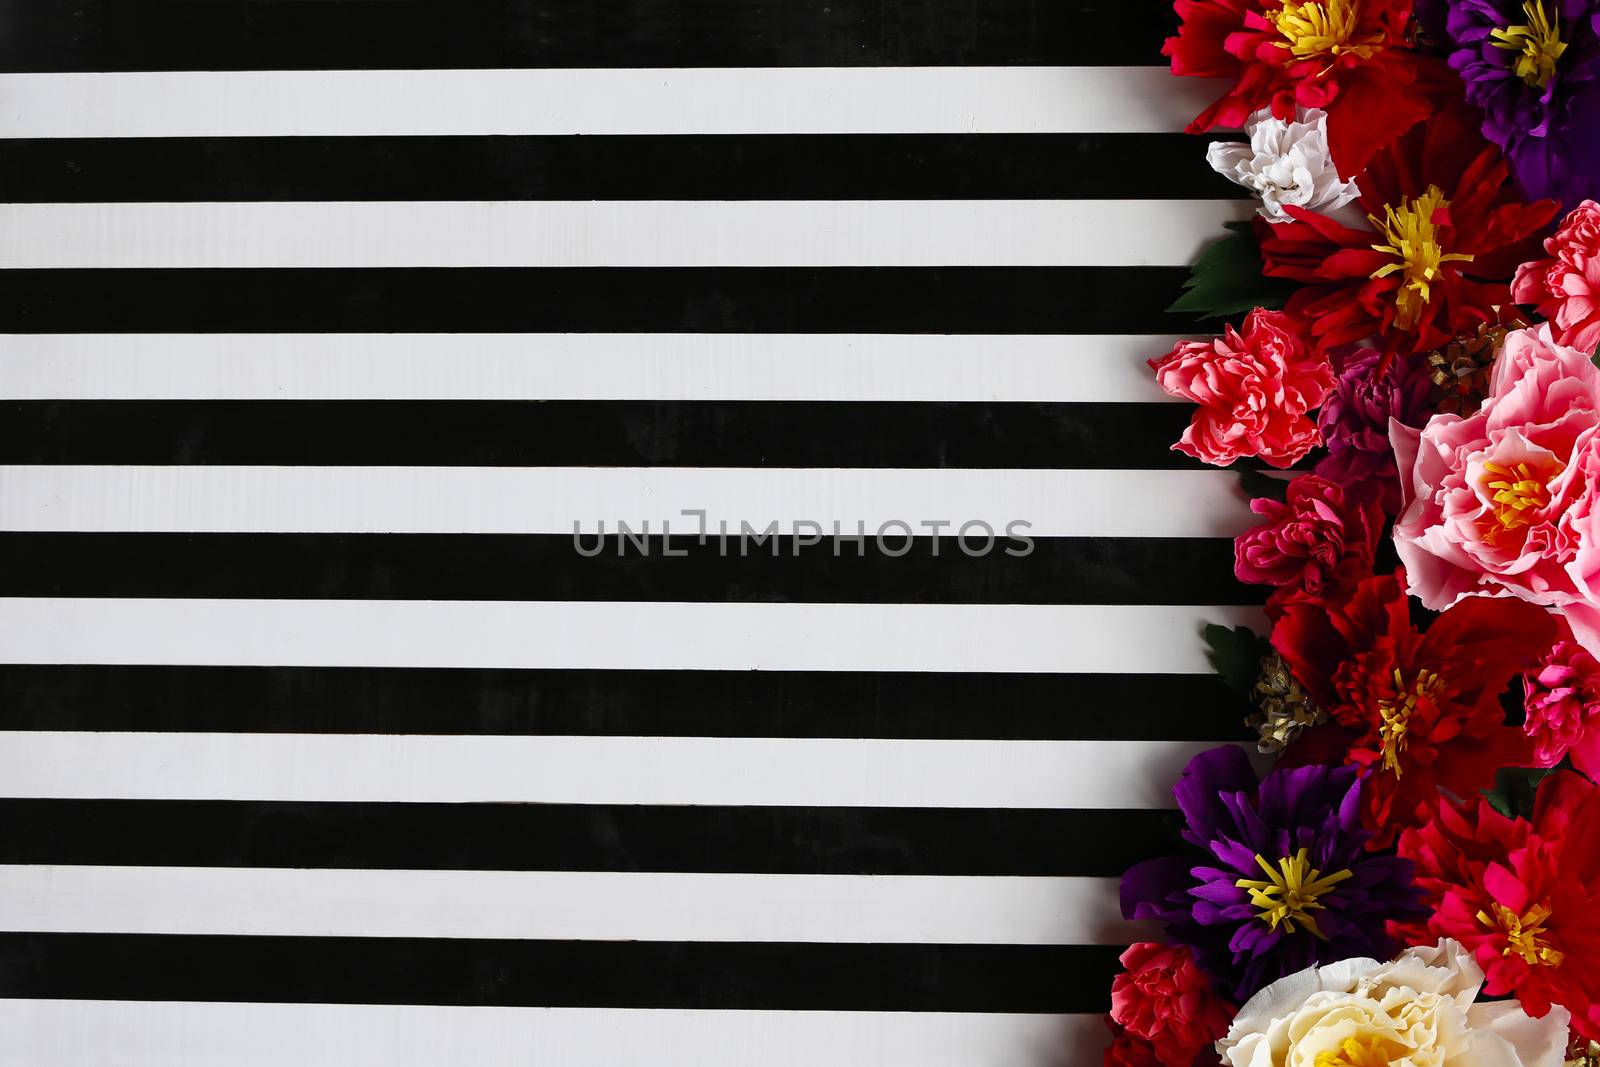 Background of black and white stripes and bright large flowers